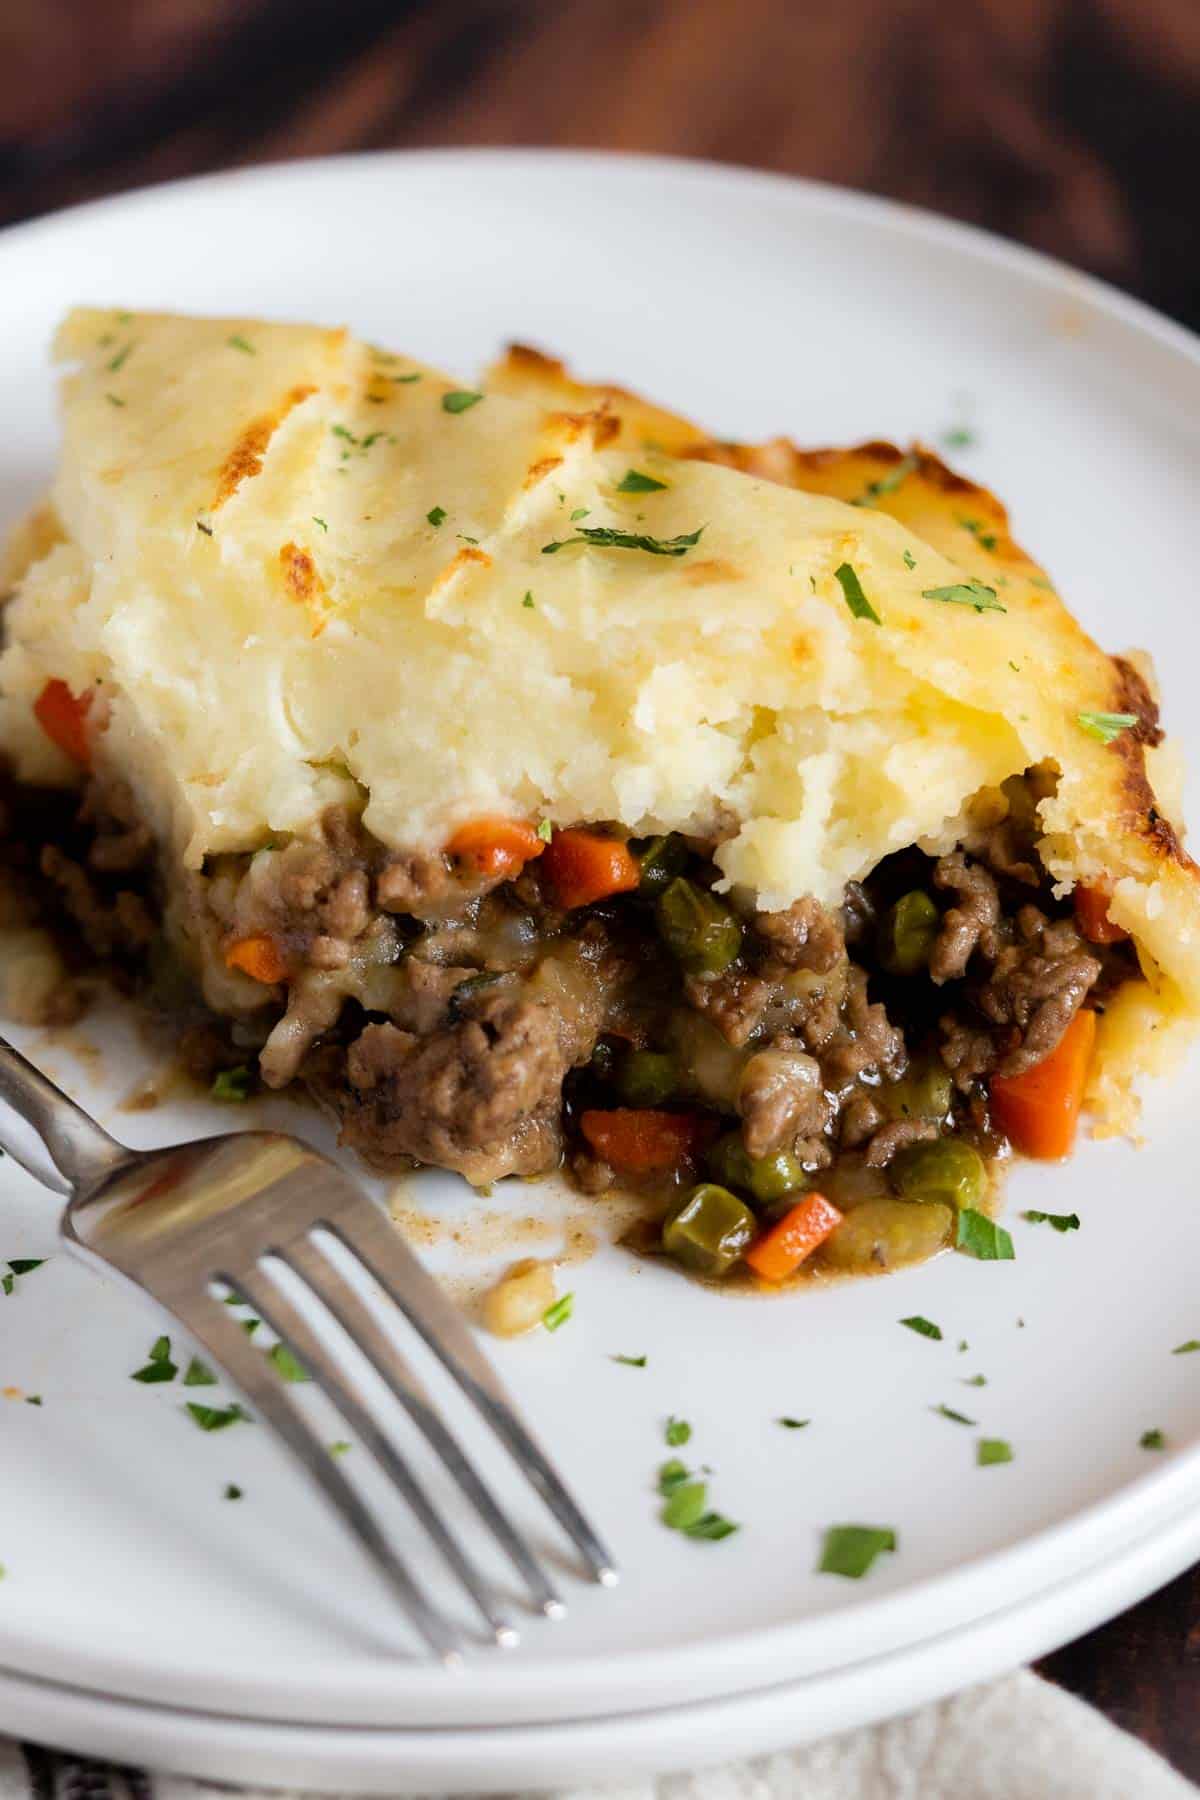 Shepherds pie served on a plate.